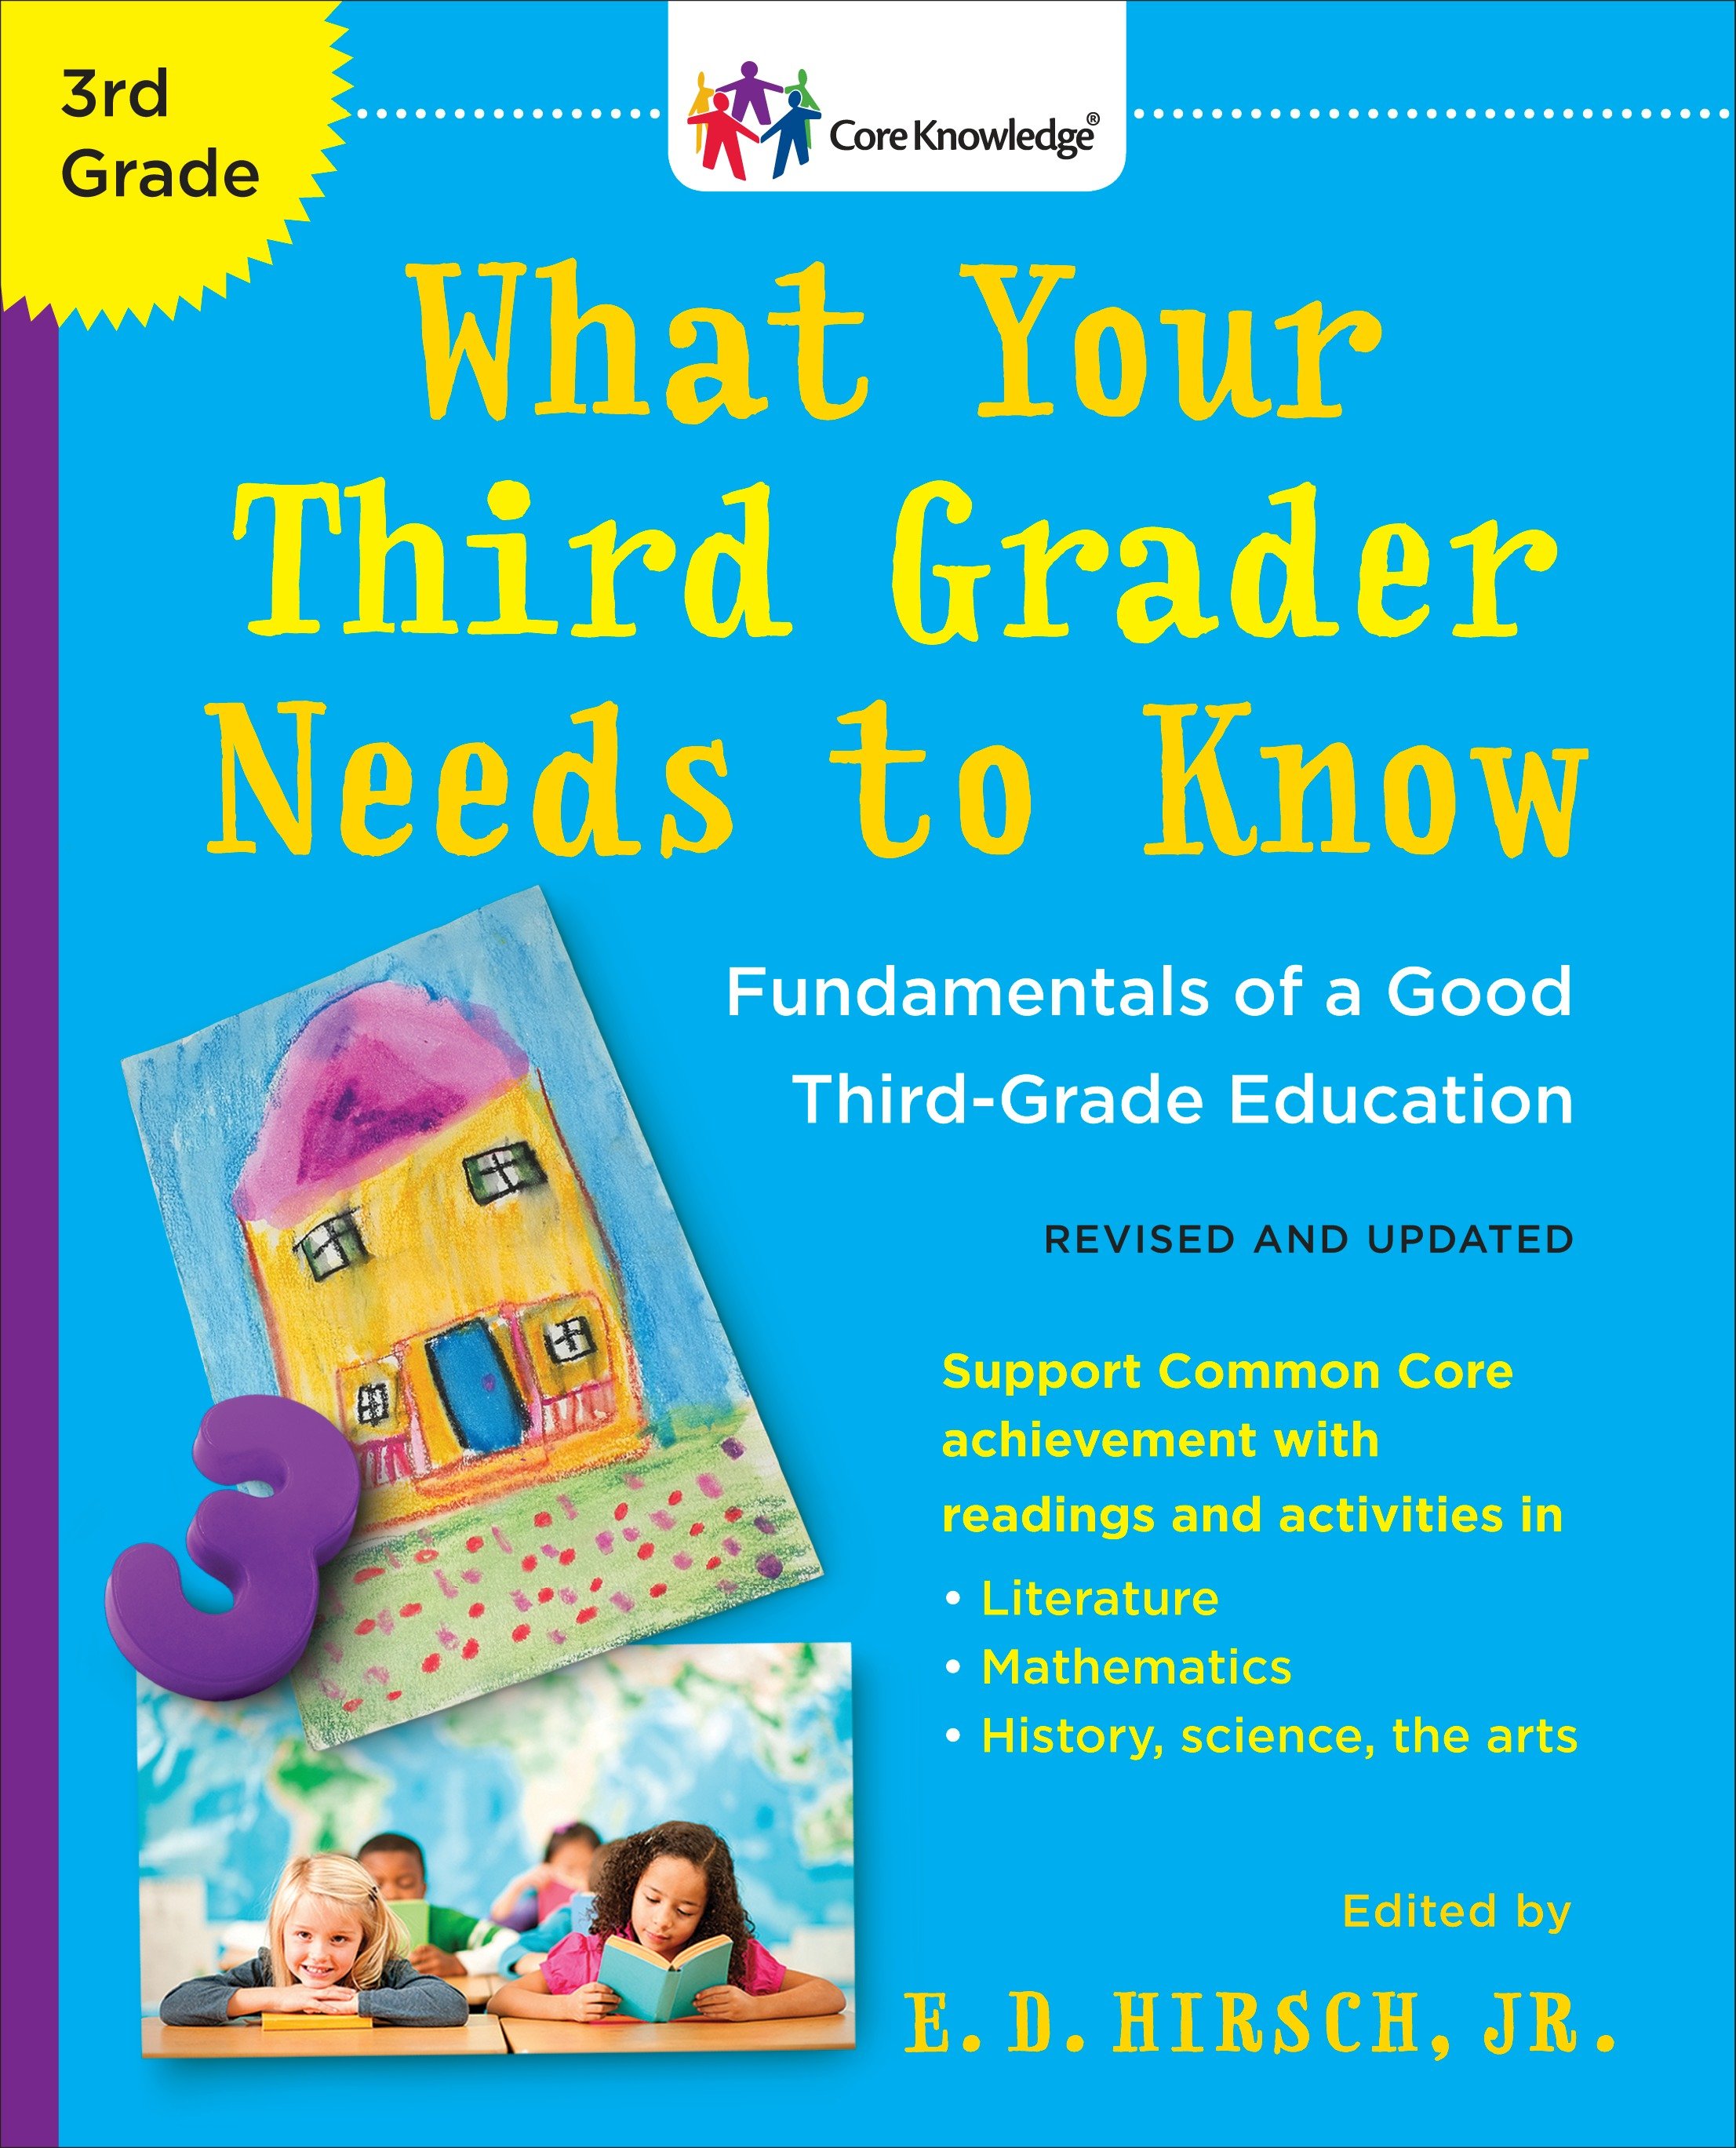 What Your Third Grader Needs to Know (Revised and Updated) Fundamentals of a Good Third-Grade Education cover image